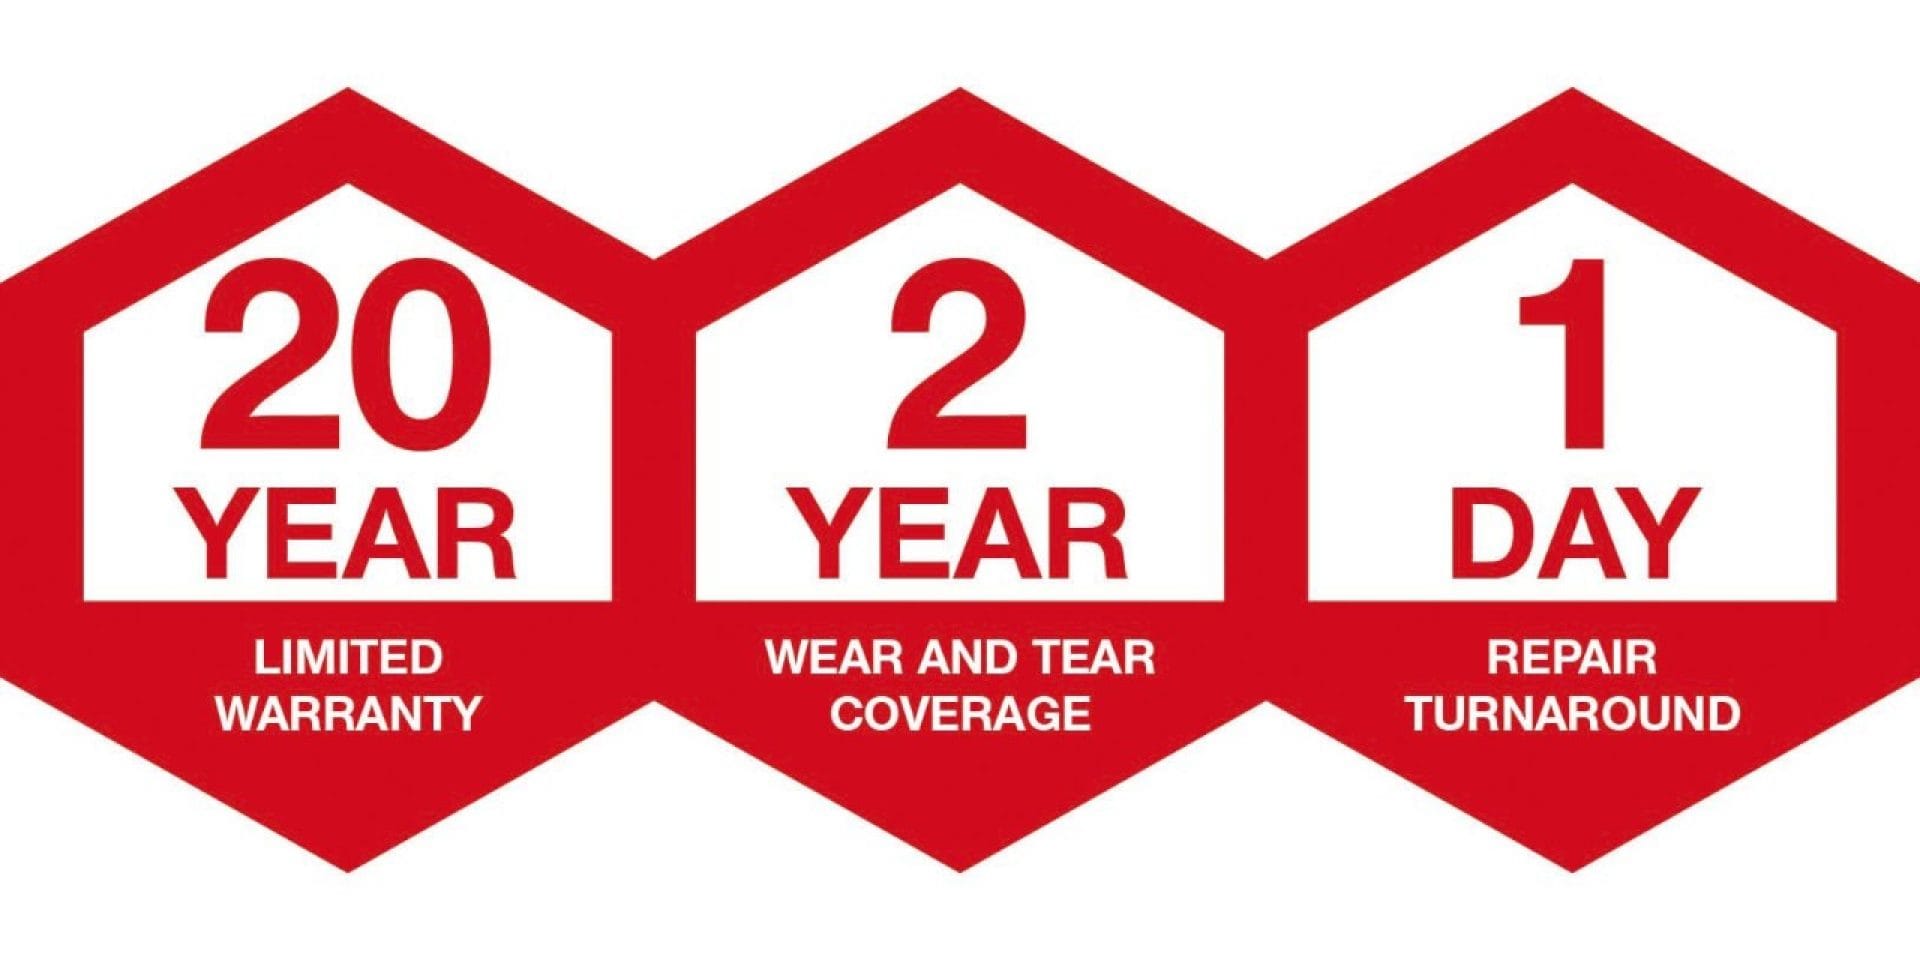 Hilti tool warranty - 20 year limited warranty, 2 year wear and tear coverage, and 1 day repair turnaround